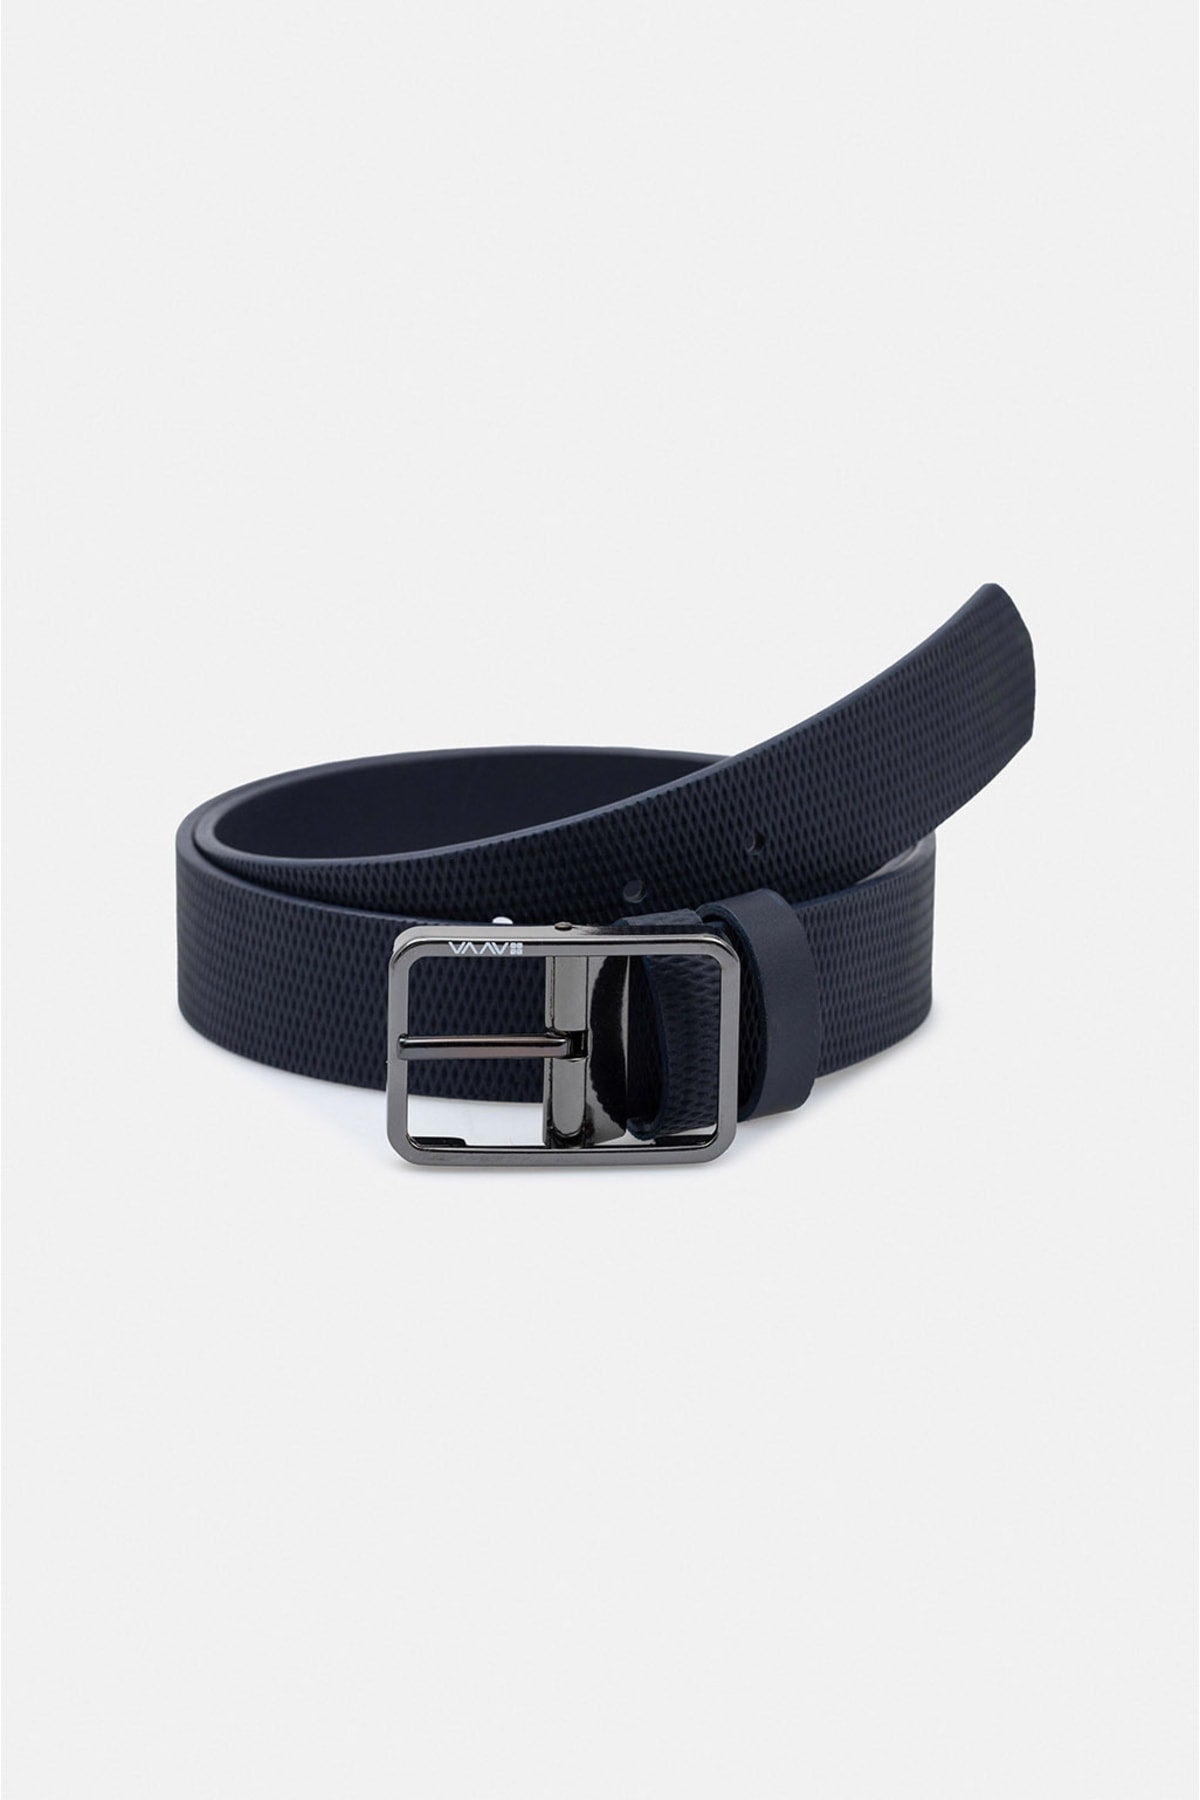 Men's navy blue double -sided patterned artificial leather belt A31y9311